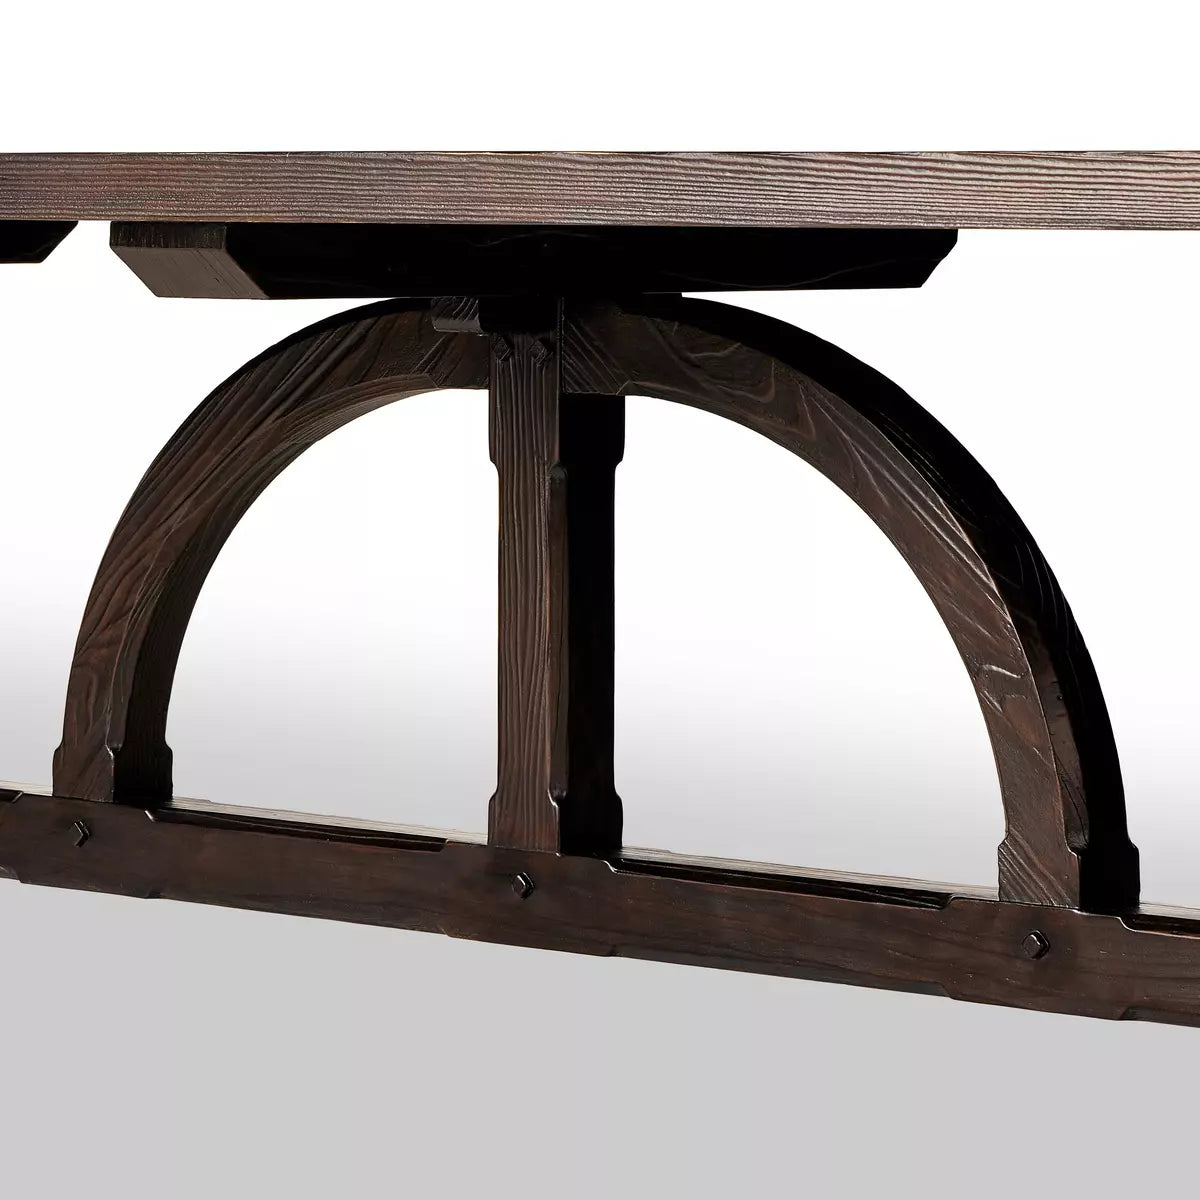 The Arch Dining Table